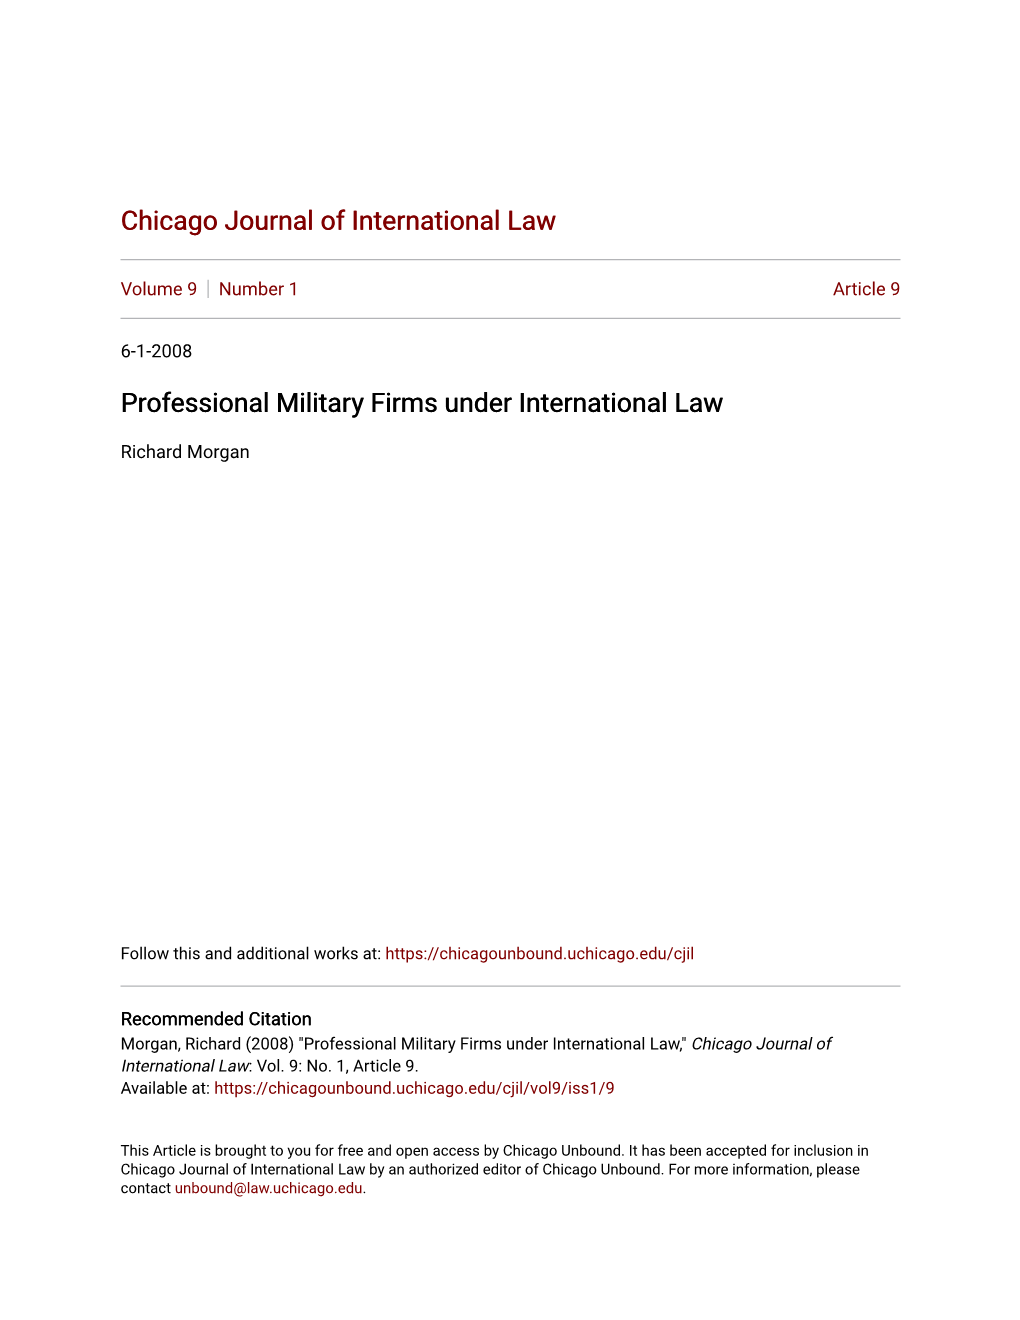 Professional Military Firms Under International Law